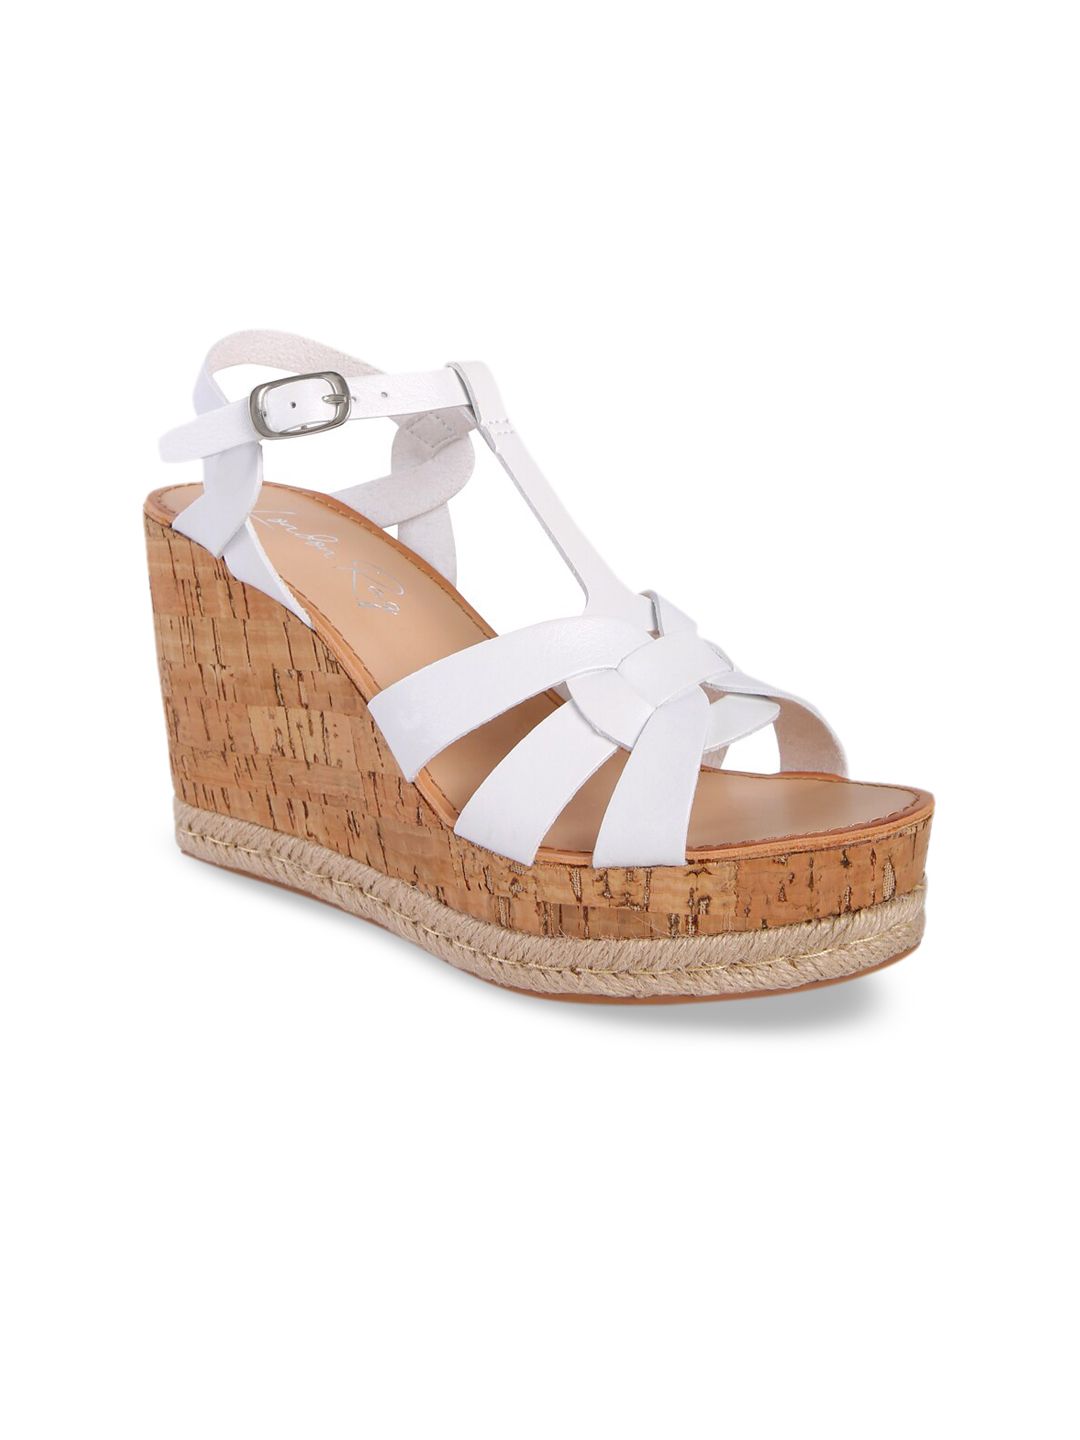 London Rag Women White PU Wedge Sandals with Buckles Price in India